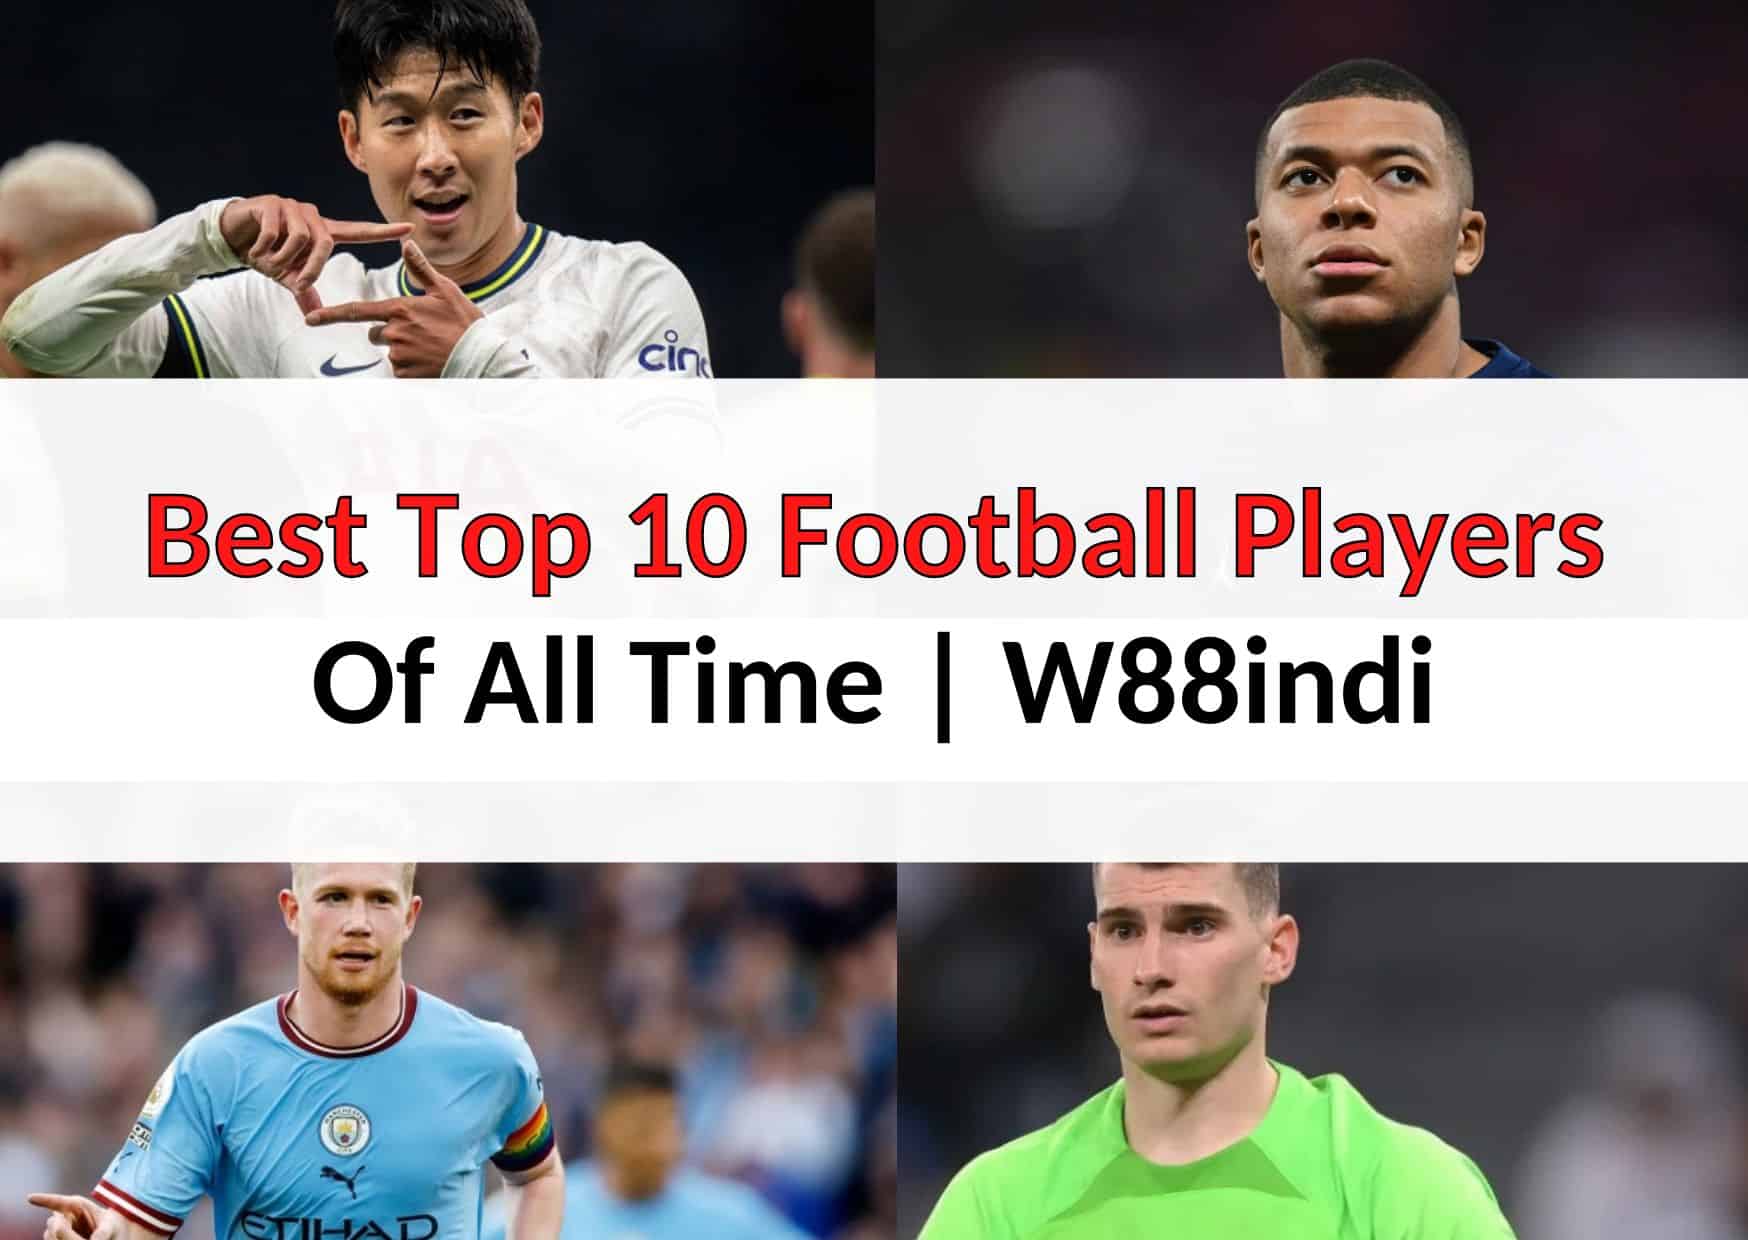 Best Top 10 Football Players of the World in 2023 - W88indi